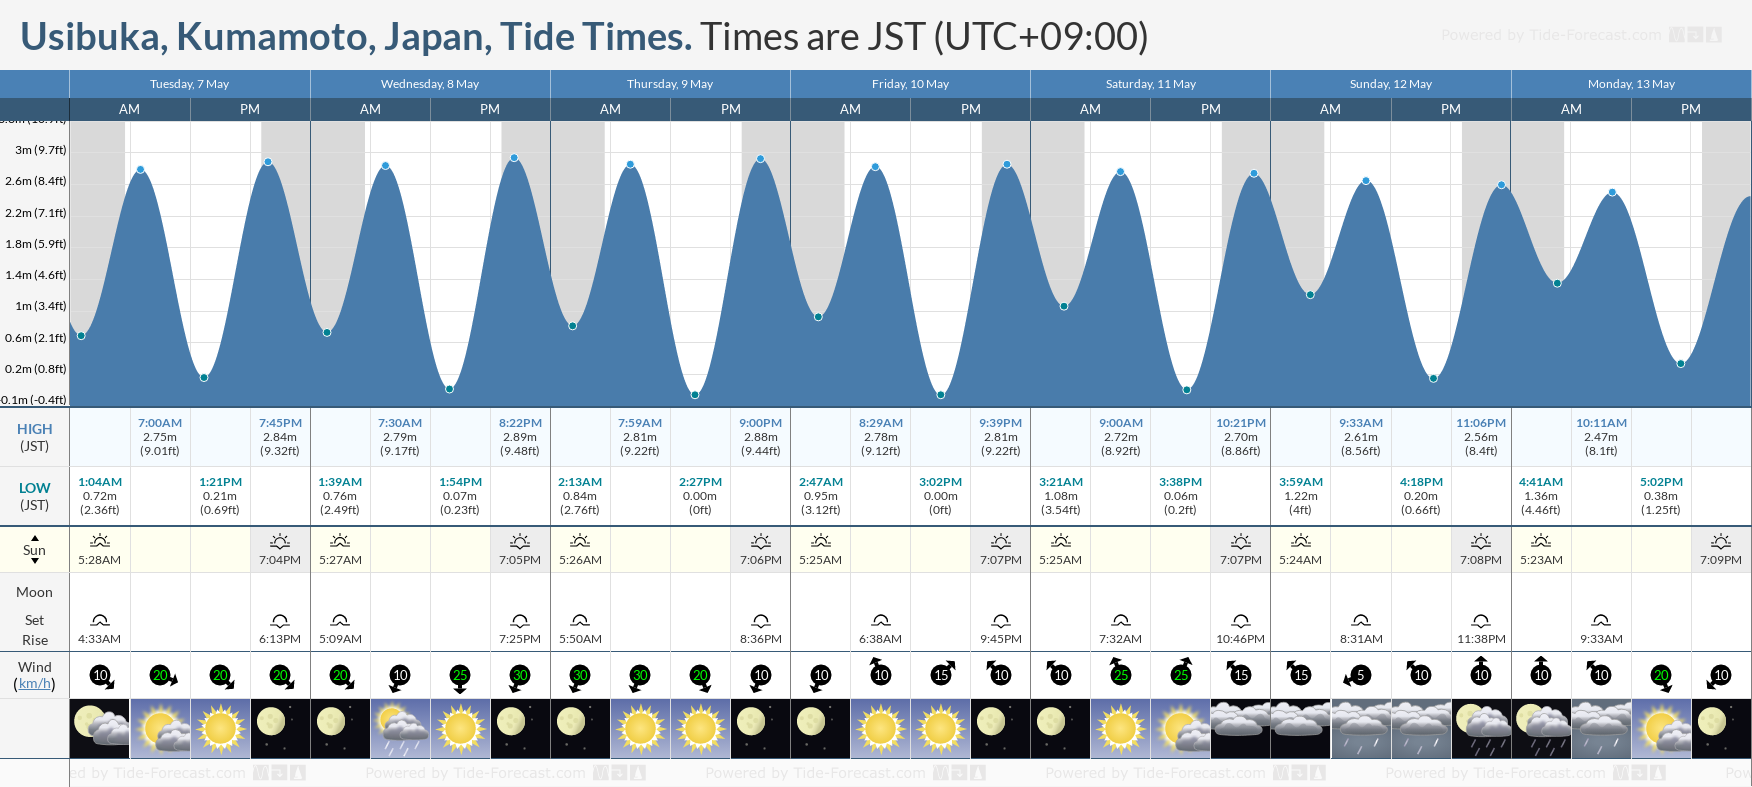 Usibuka, Kumamoto, Japan Tide Chart including high and low tide tide times for the next 7 days